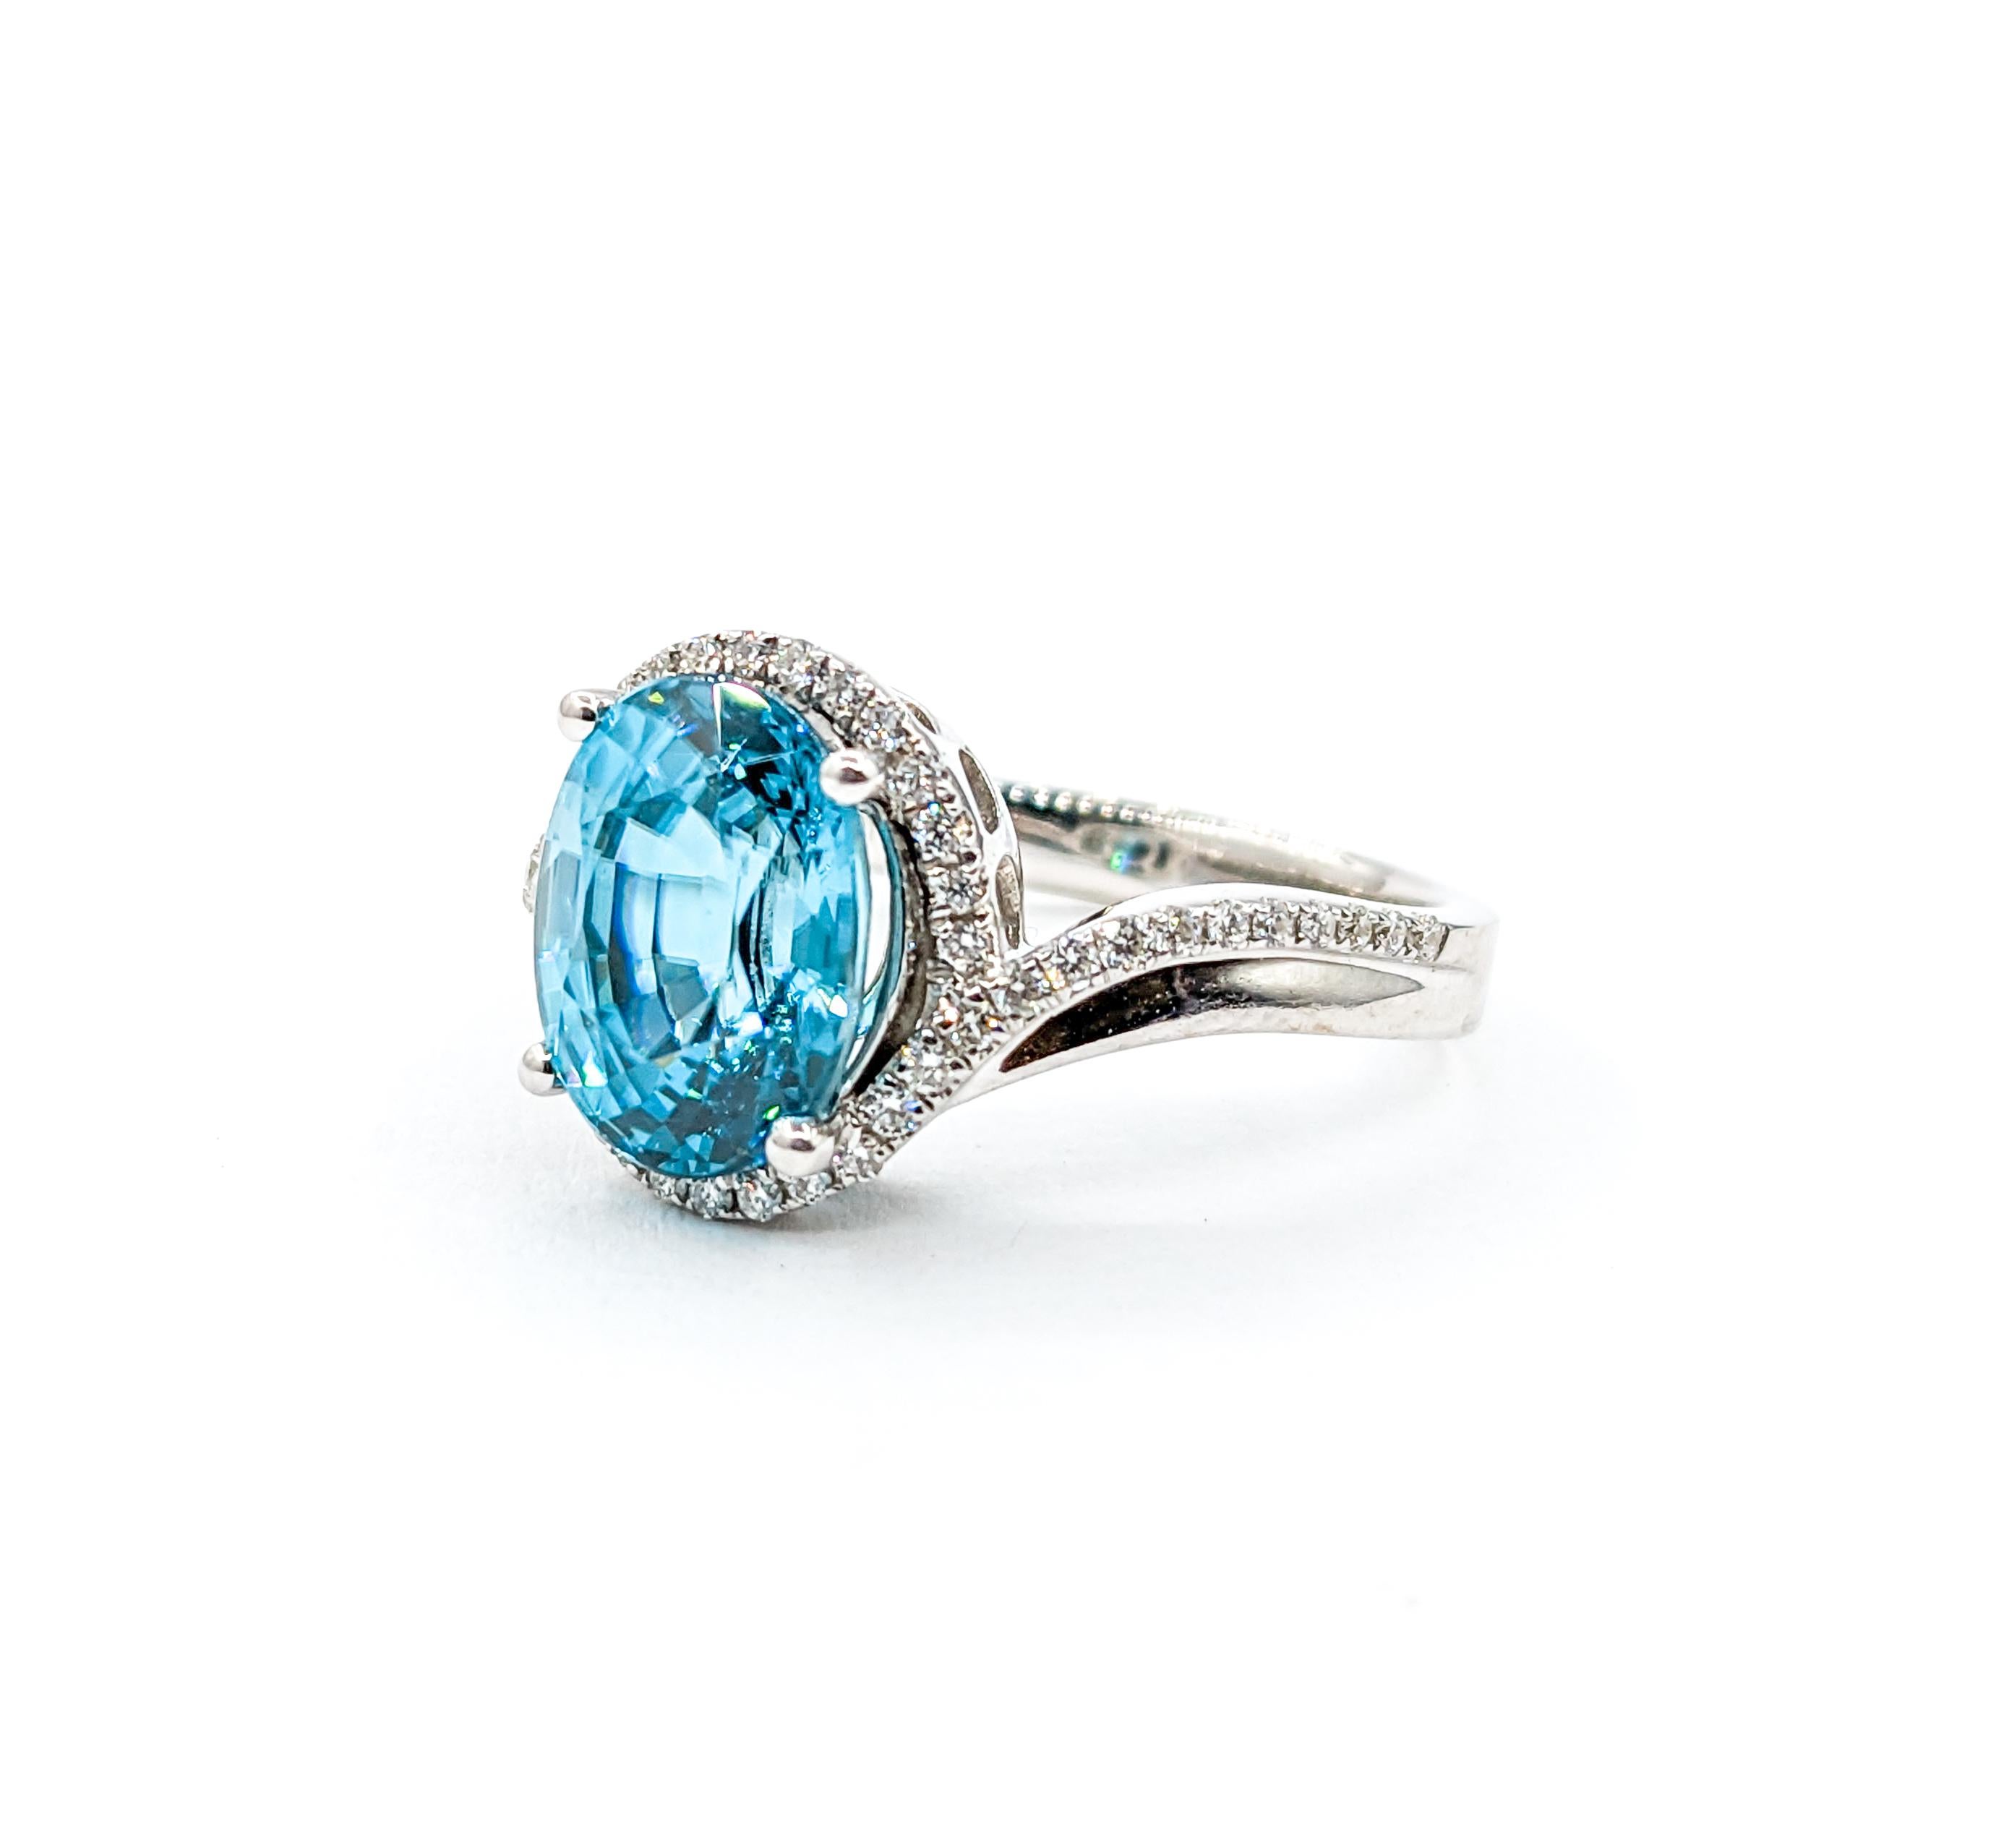 5.0ct Blue Zircon & Diamond Ring In White Gold For Sale 5